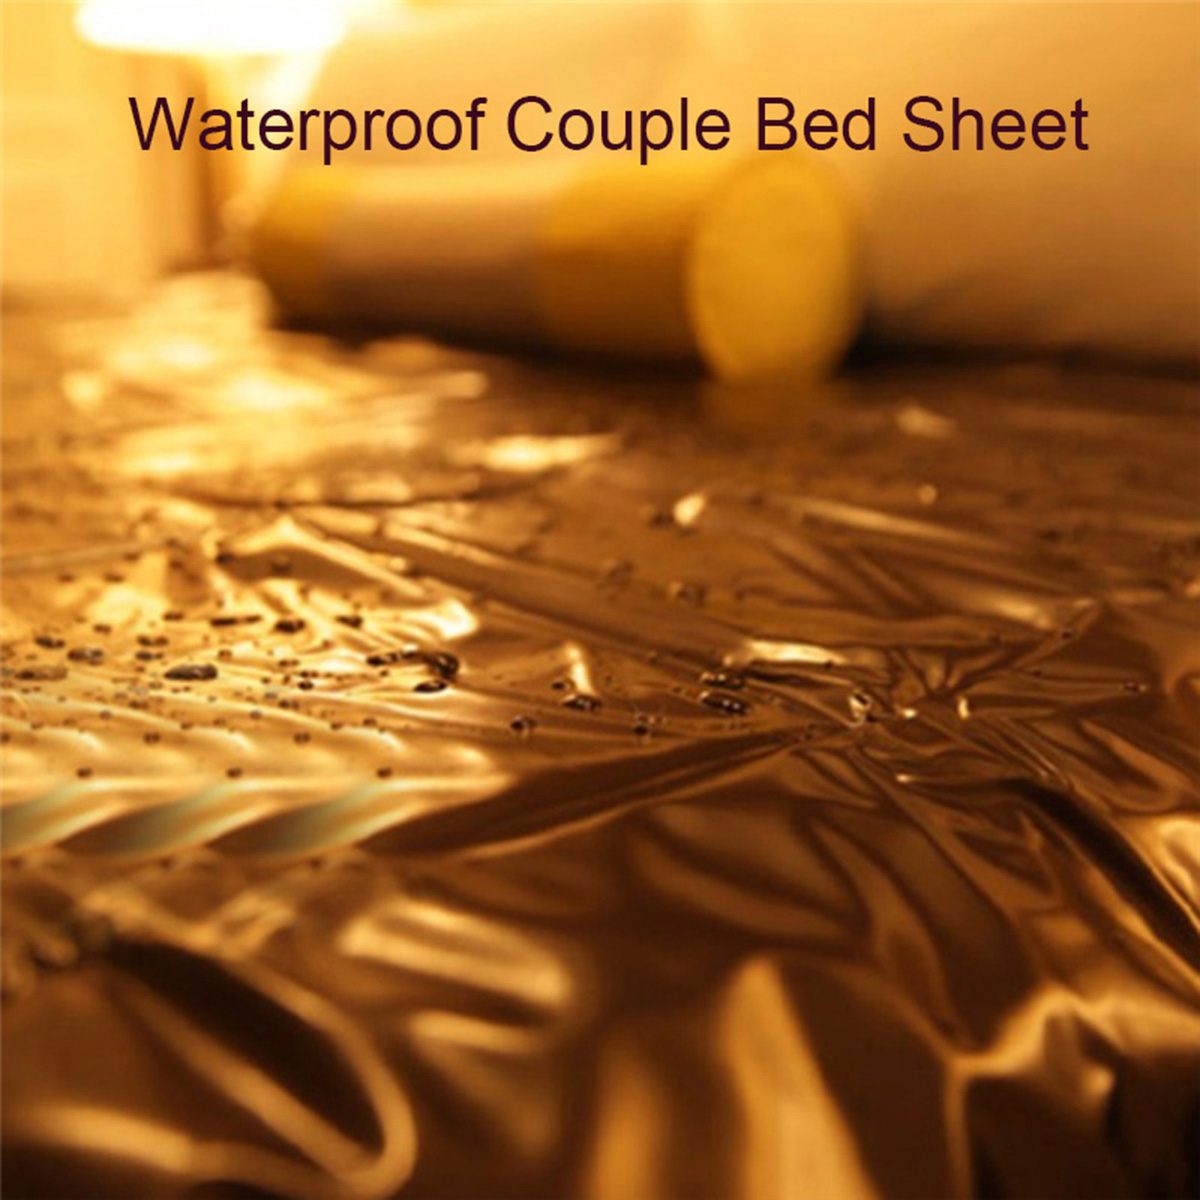 Waterproof Adult Bed Sheets S-e-x PVC Vinyl Mattress Cover Allergy Relief Bed Bug Hypoallergenic S-e-x Game Bedding Sheets